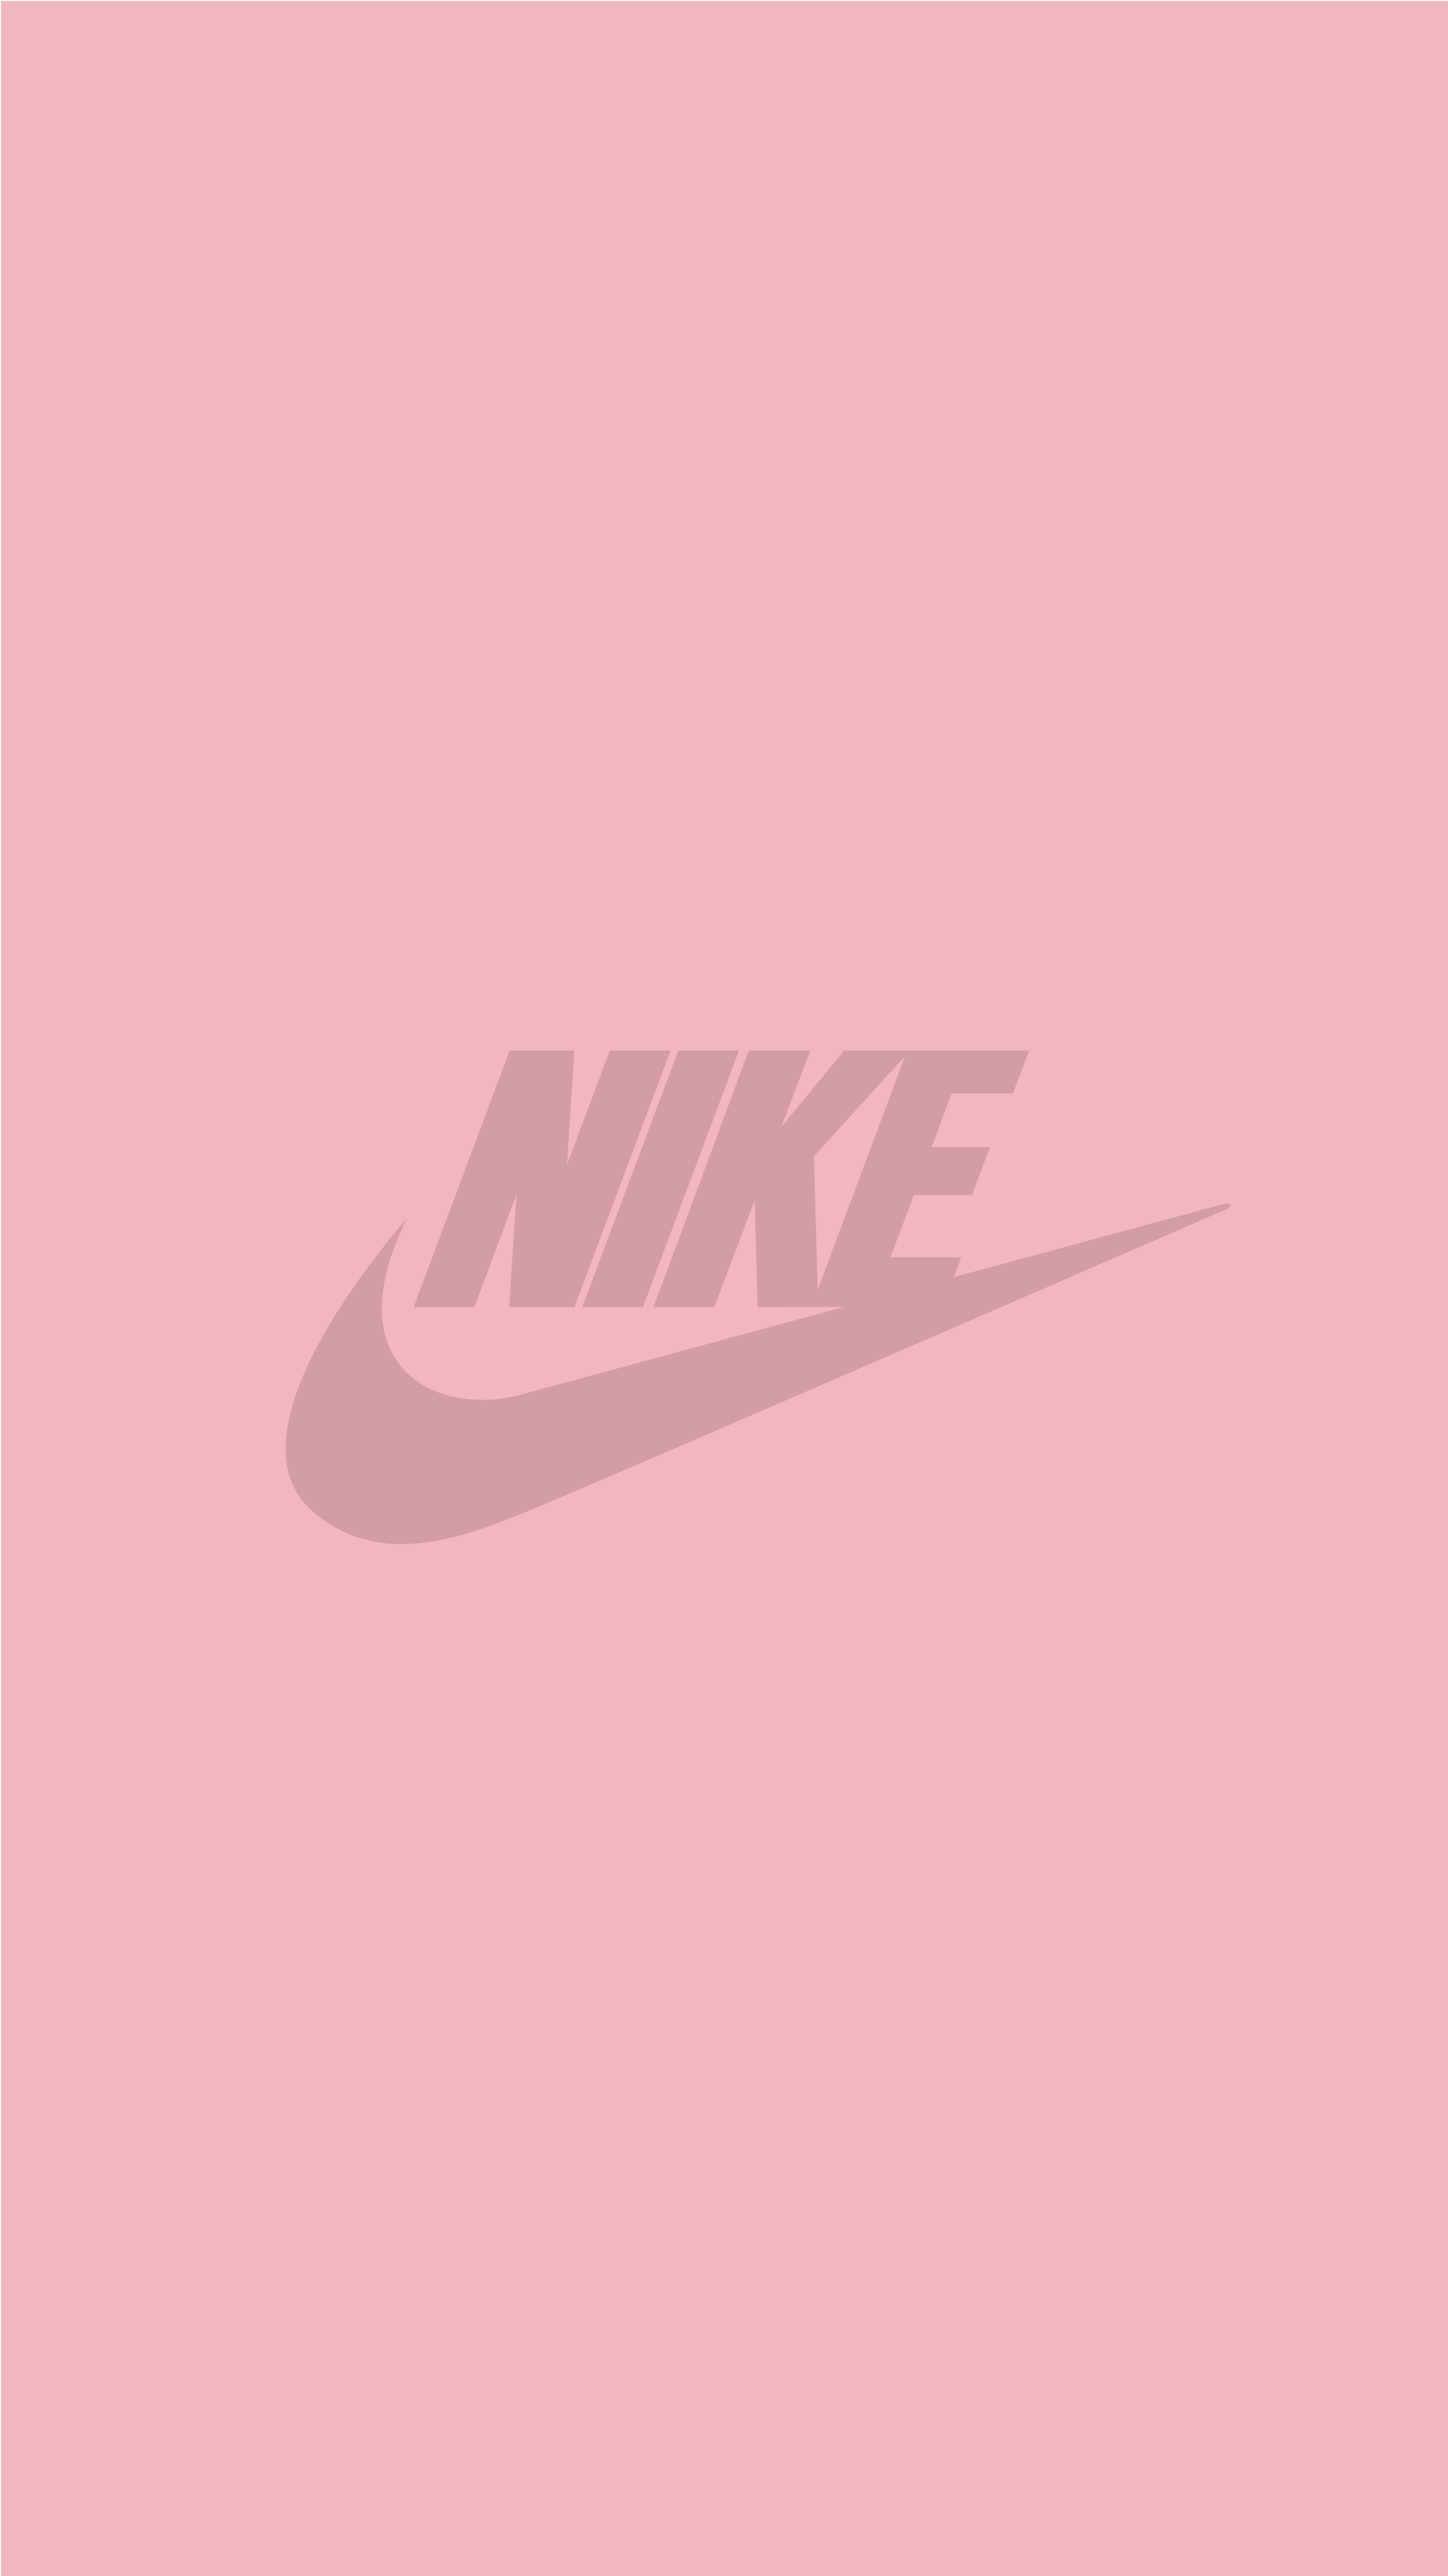 A pink background with the nike logo on it - Nike